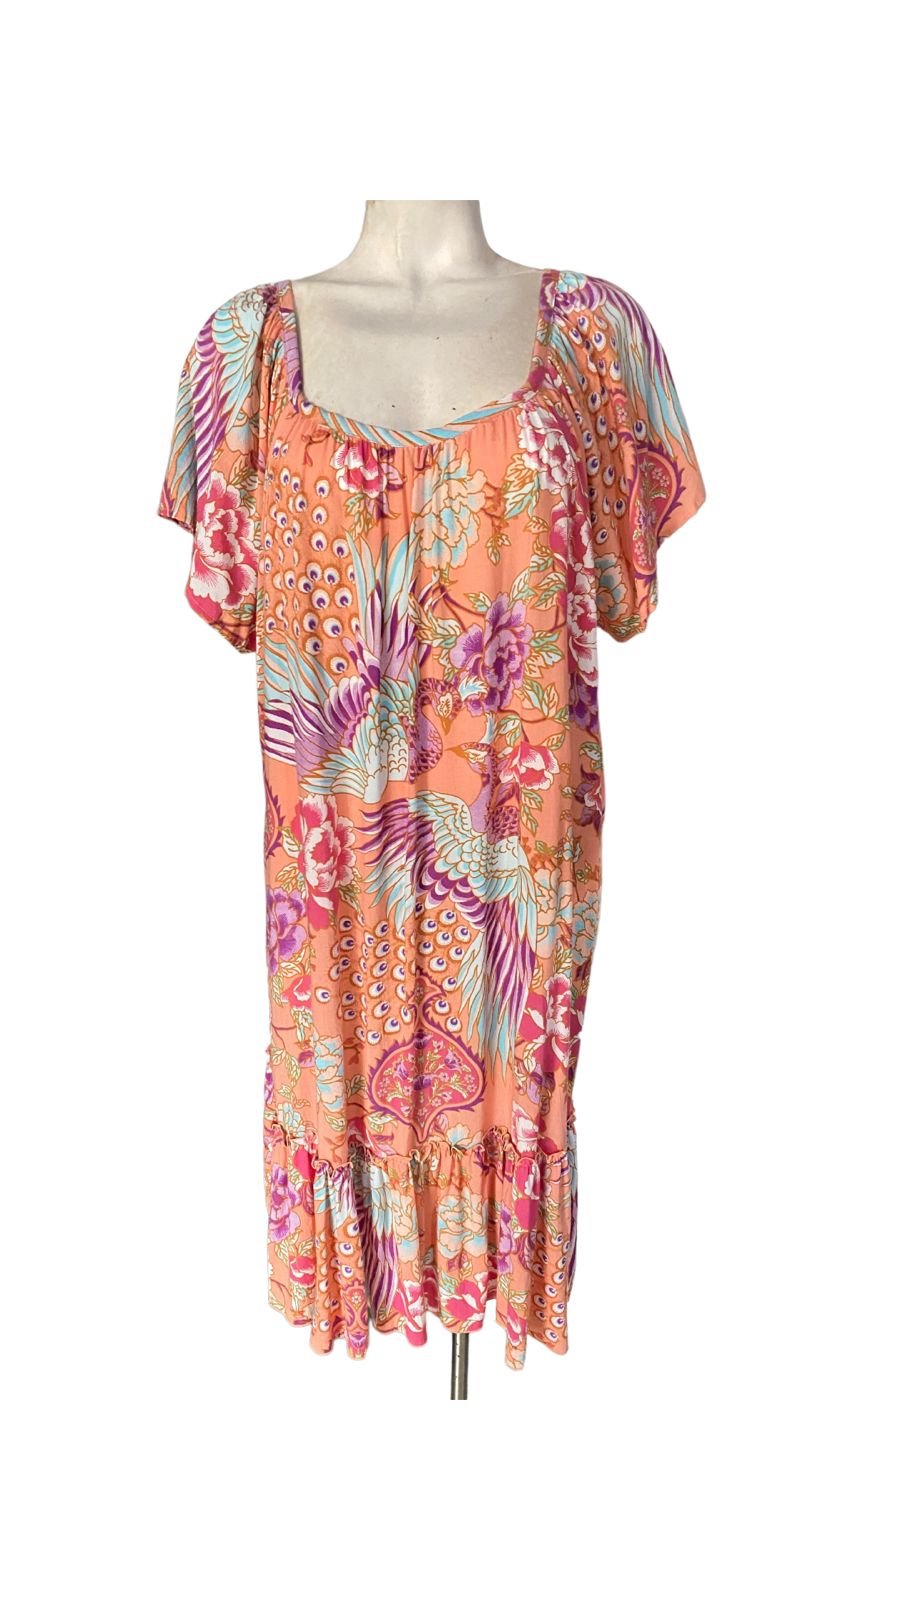 Trendy Bali Boho Dresses Stay Cool and Chic